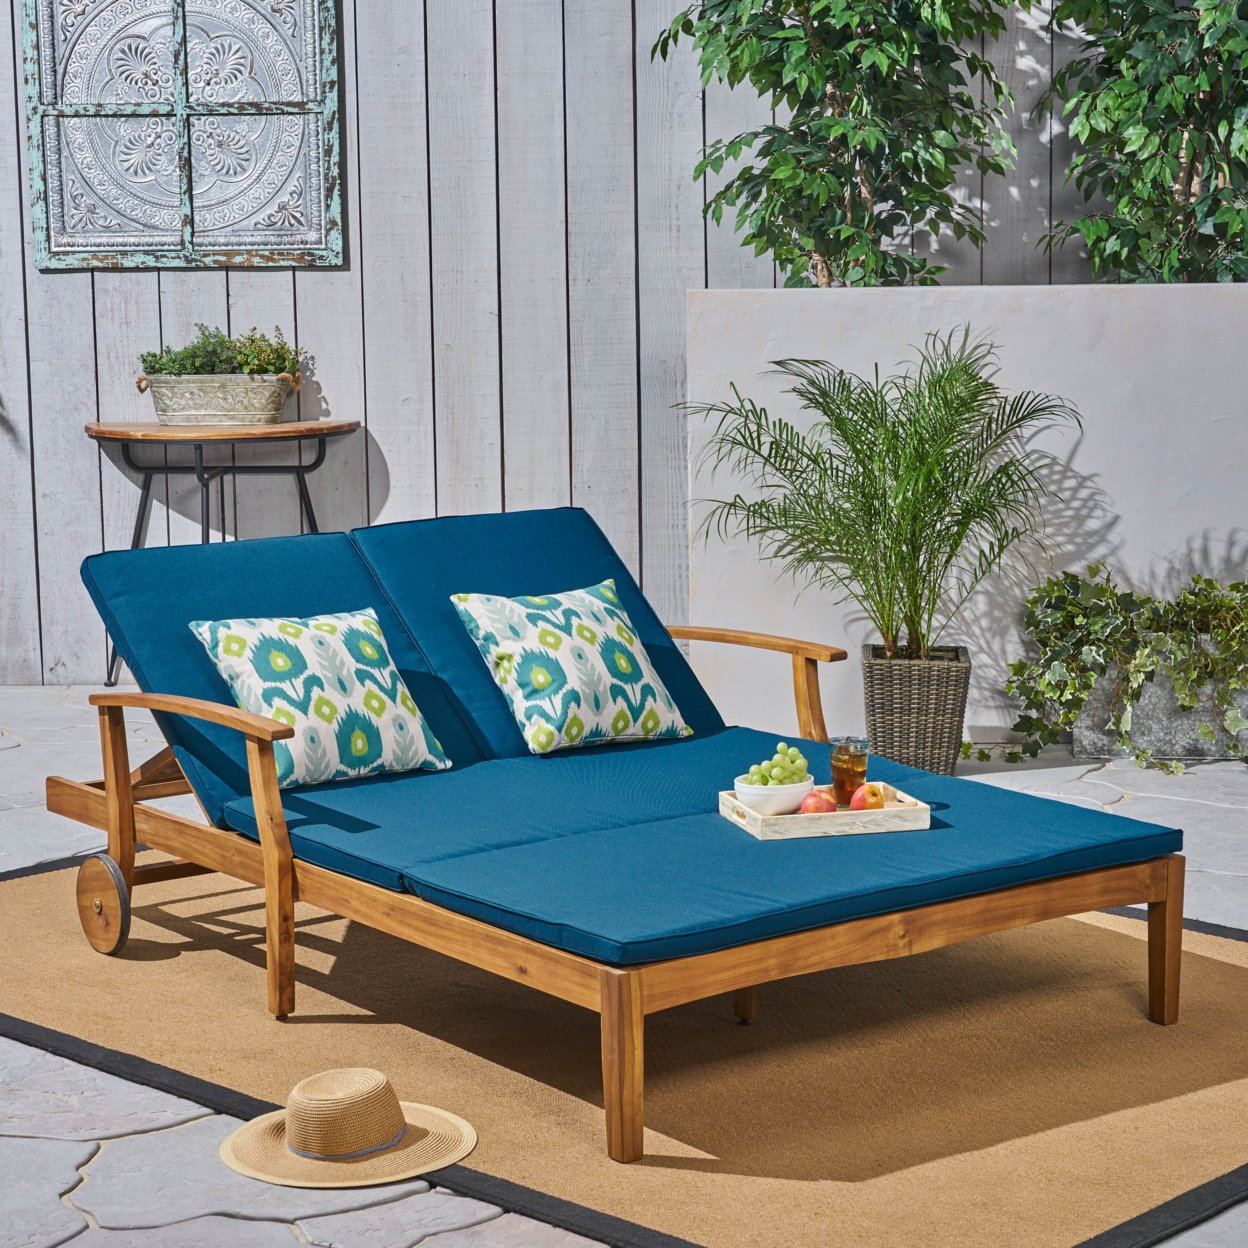 Samantha Double Chaise Lounge For Yard And Patio, Acacia Wood Frame - Green